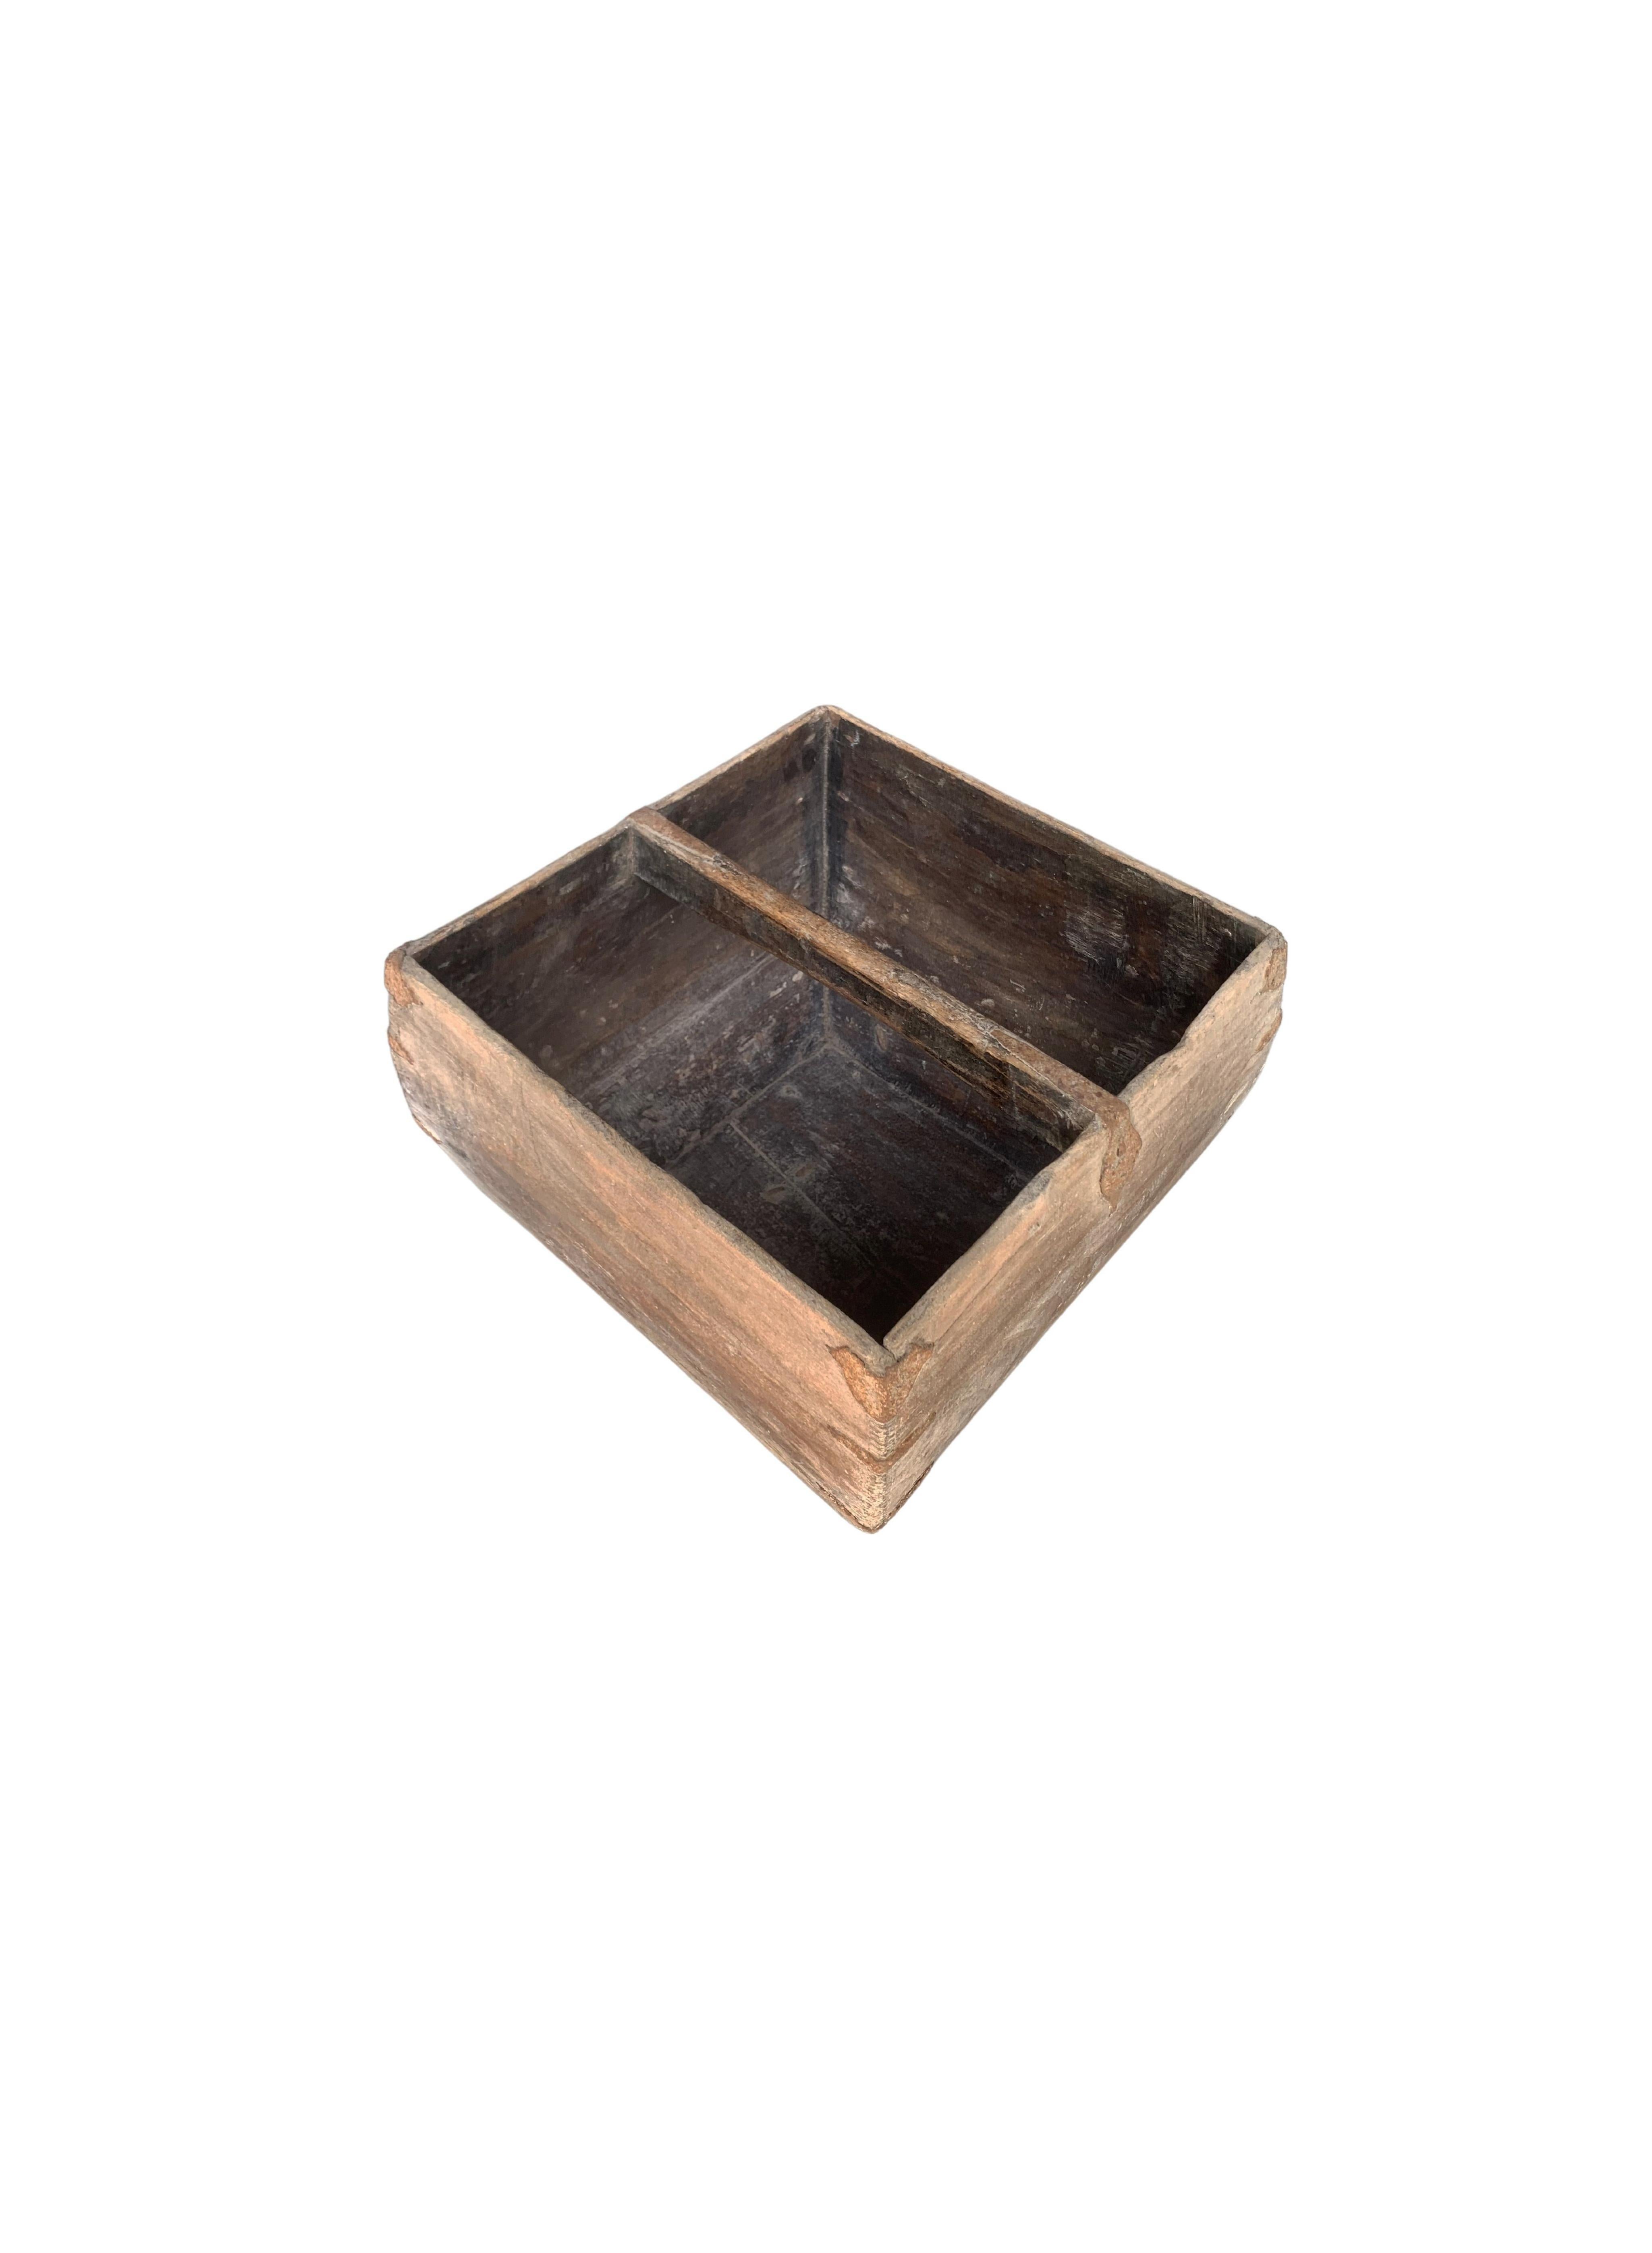 Other Chinese Rice Measure Basket with Iron Fittings, Early 20th Century For Sale